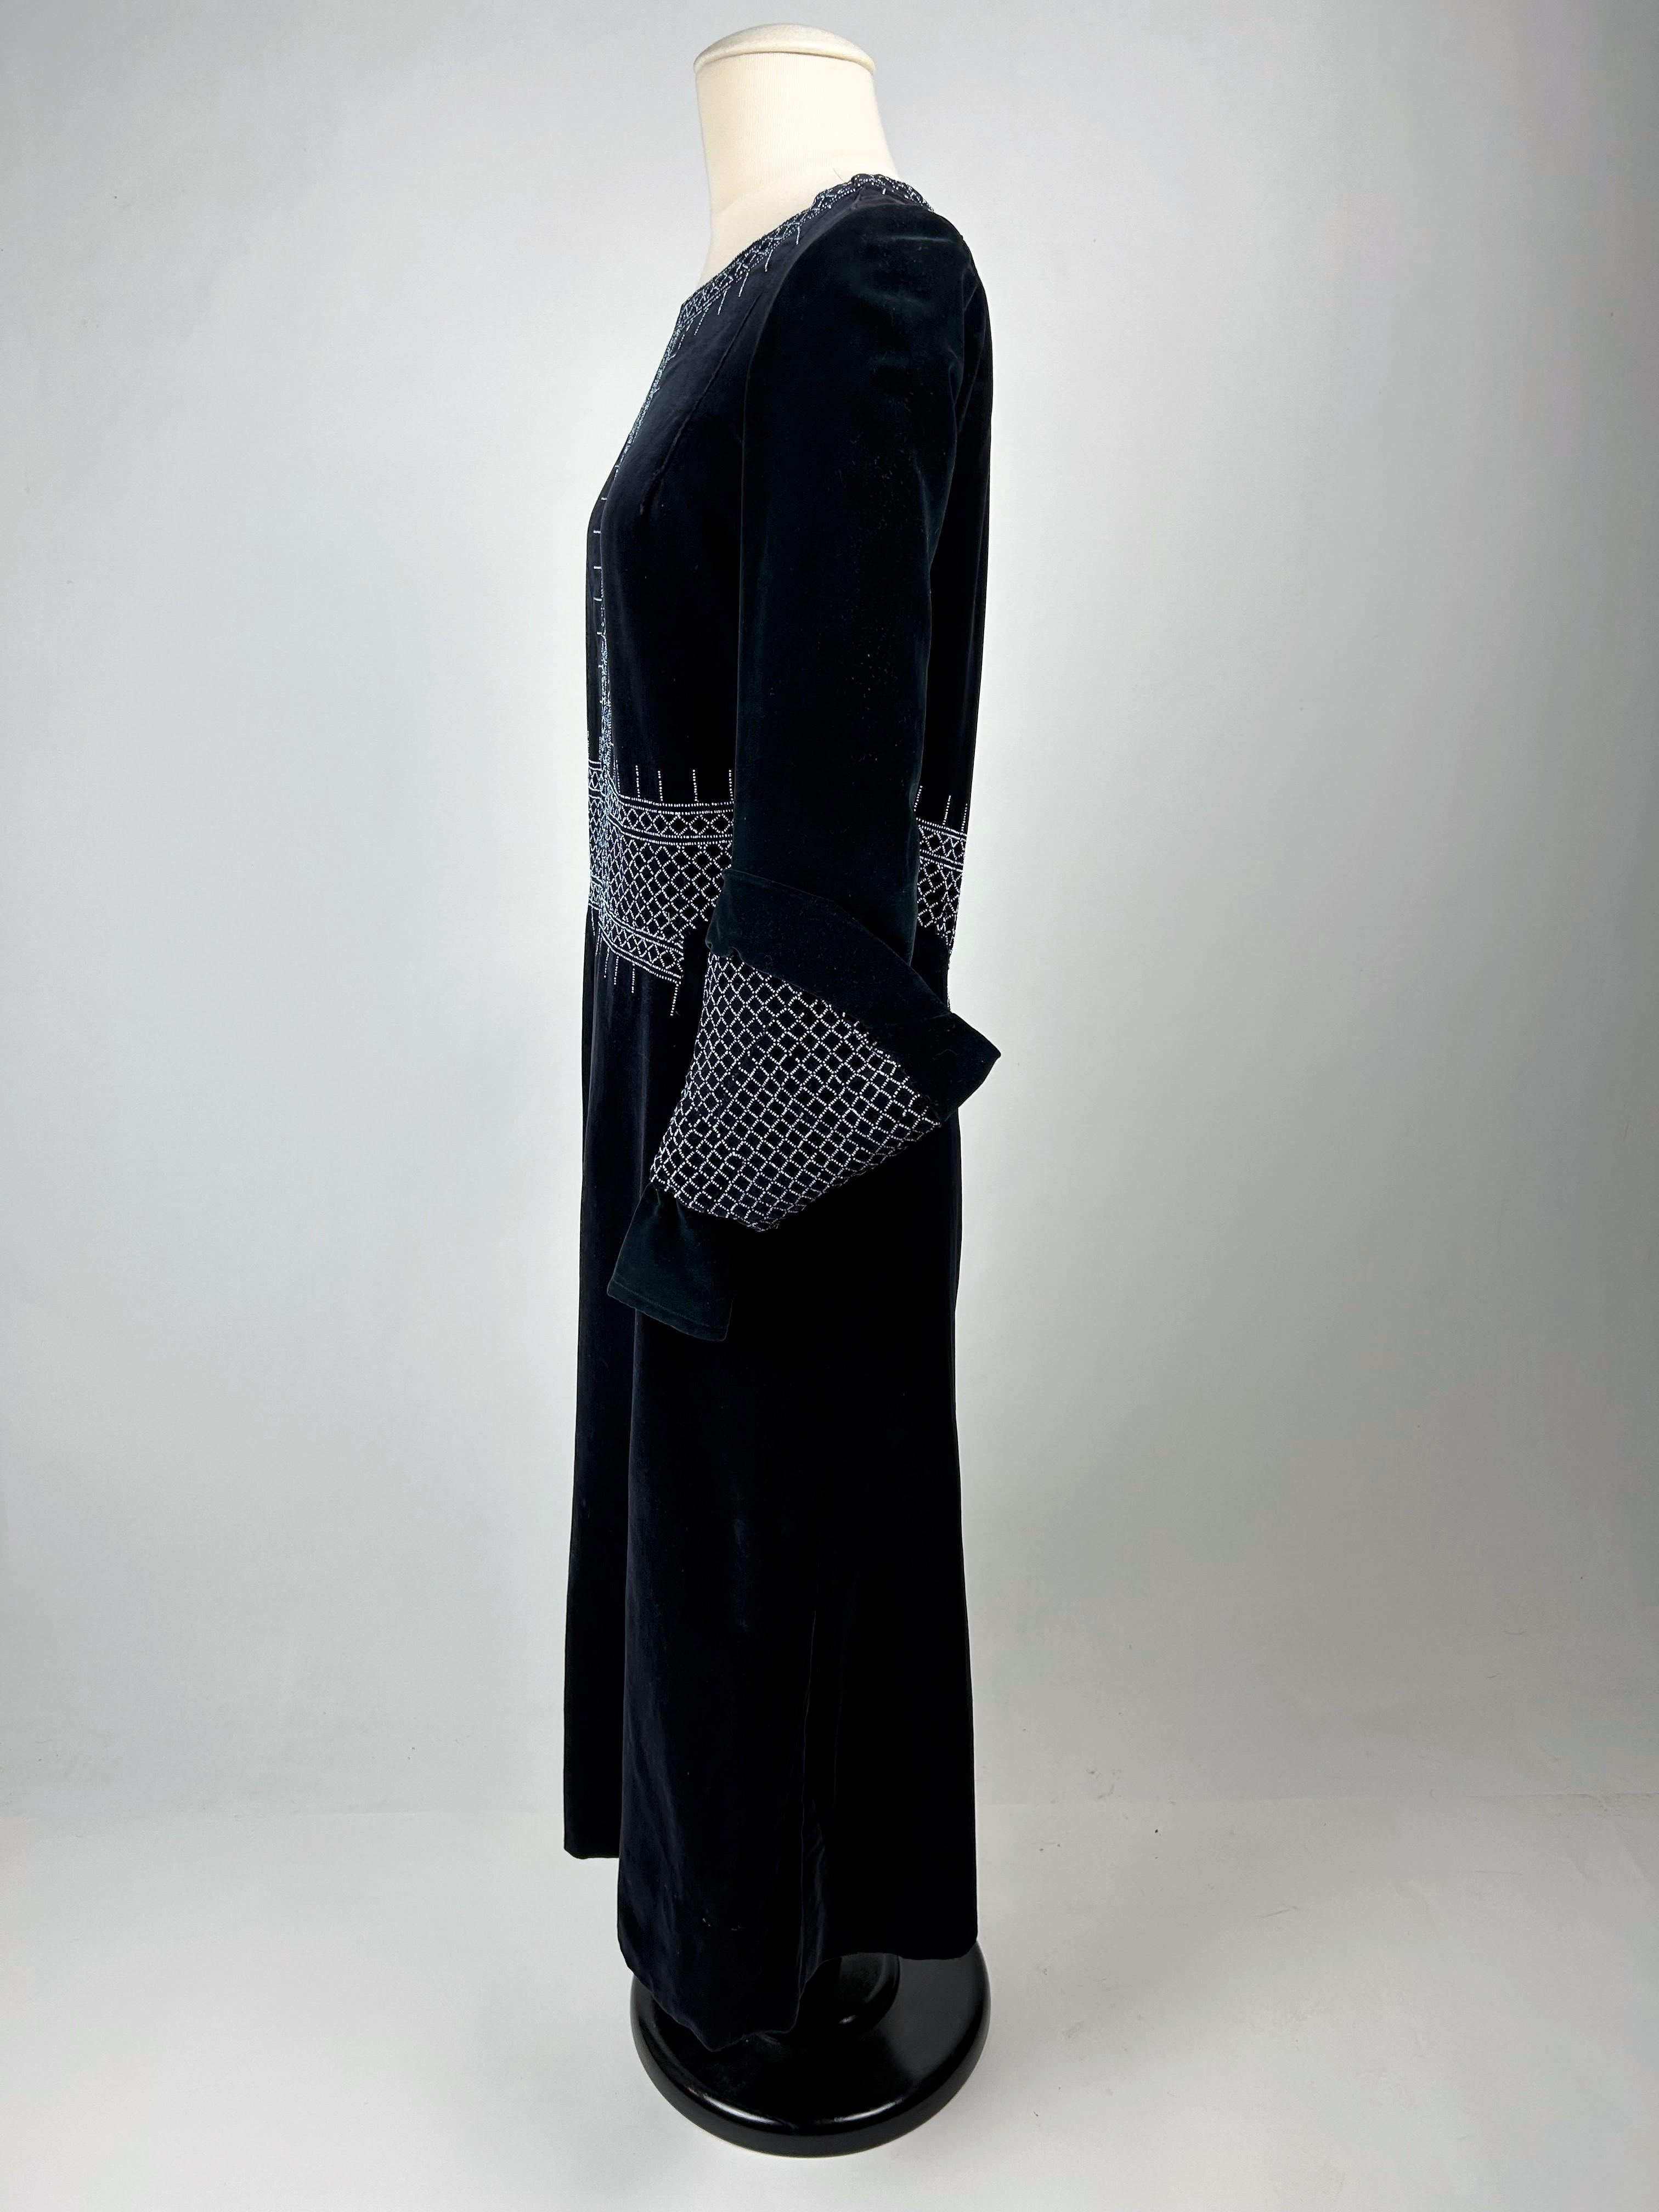 A Navy Velvet Sac Dress with glass beads embroideries - France Circa 1925-1930 For Sale 7